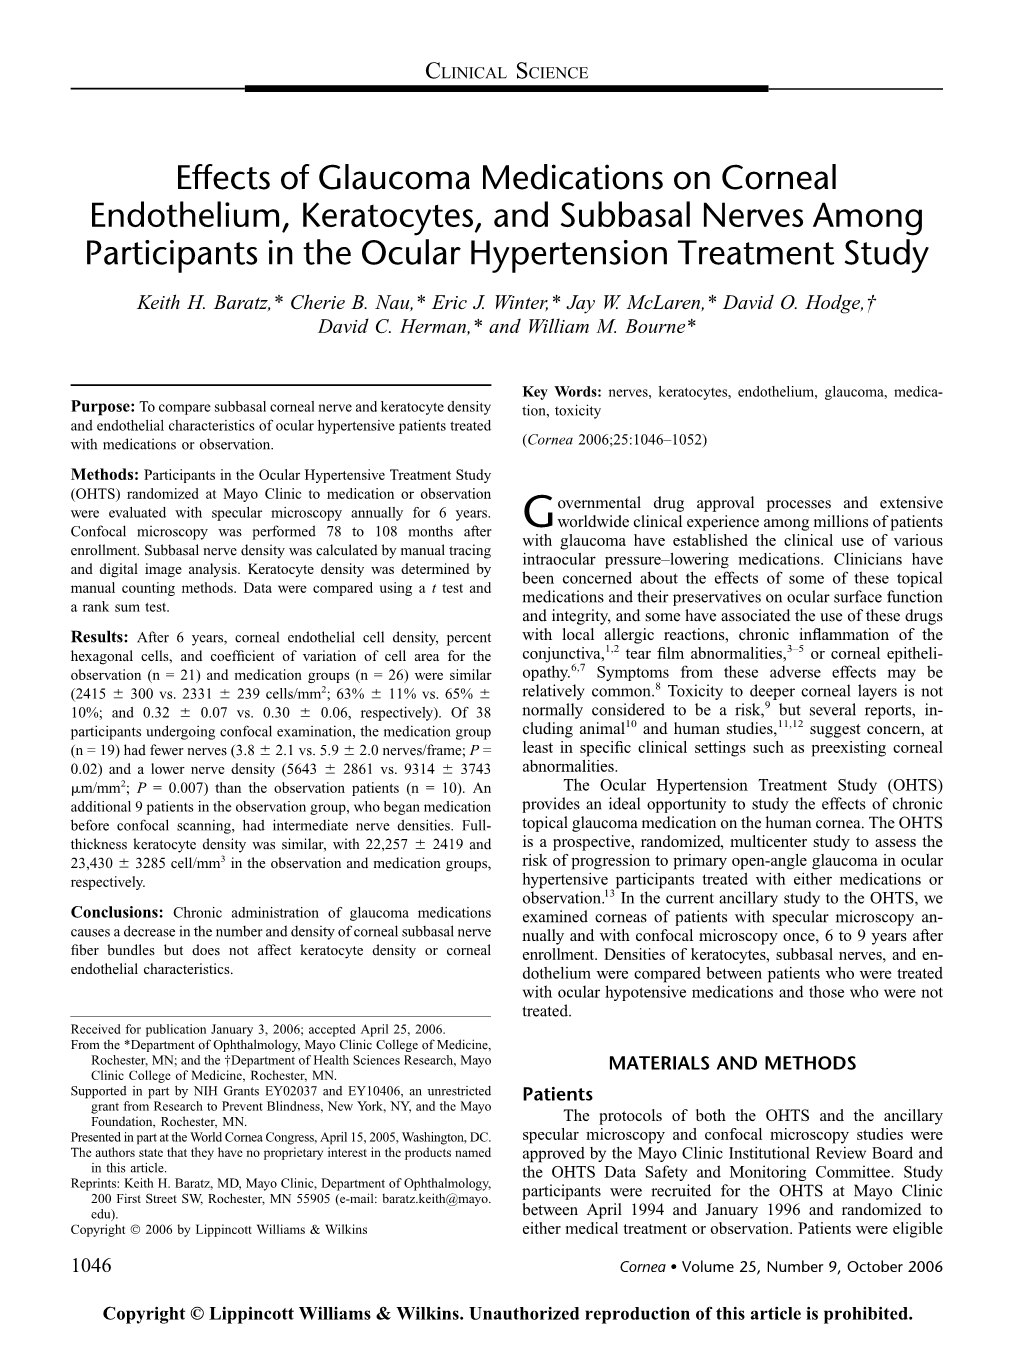 Effects of Glaucoma Medications on Corneal Endothelium, Keratocytes, and Subbasal Nerves Among Participants in the Ocular Hypertension Treatment Study Keith H